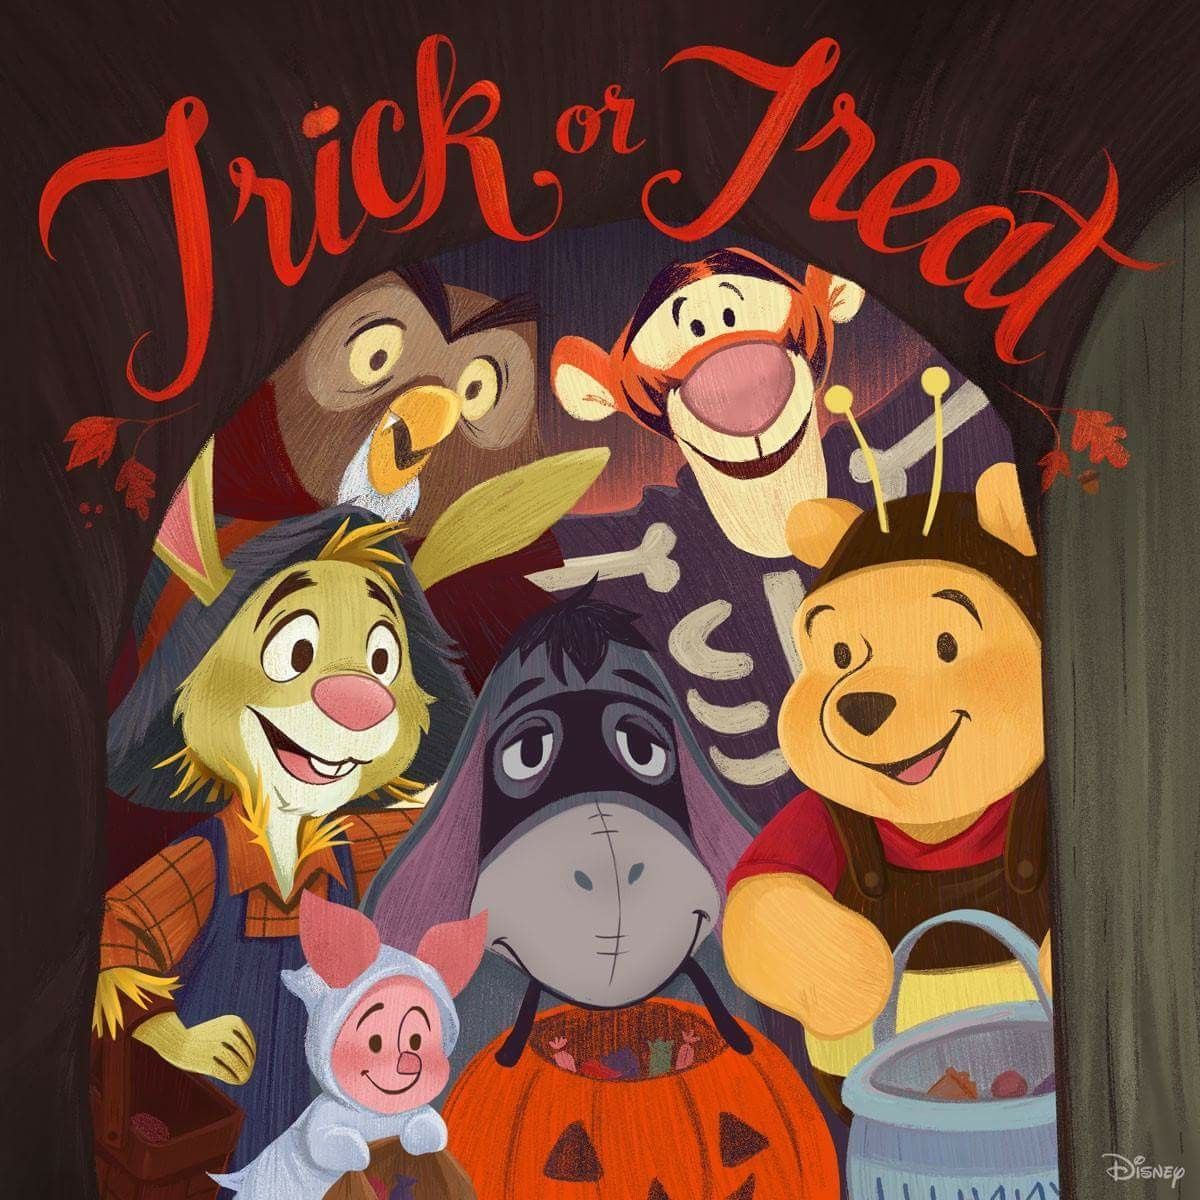 Bee a very scary bear. Happy Halloween!. Cute winnie the pooh, Winnie the pooh picture, Tigger and pooh